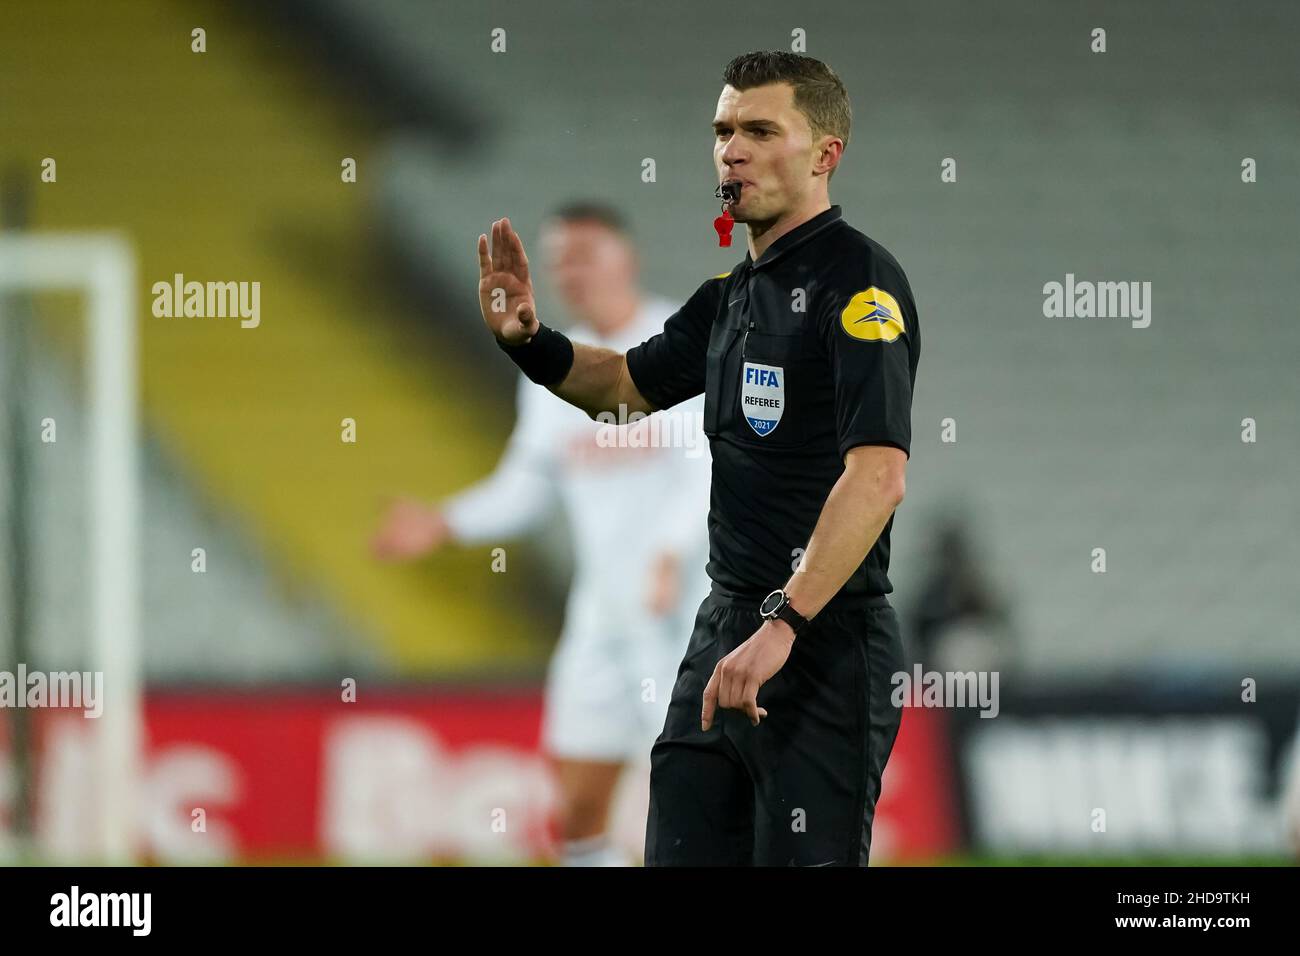 LENS, FRANCE - JANUARY 4: Referee Willy Delajod during the French Cup match between Racing Club de Lens and LOSC Lille at Stade Bollaert-Delelis on January 4, 2022 in Lens, France (Photo by Jeroen Meuwsen/Orange Pictures) Stock Photo